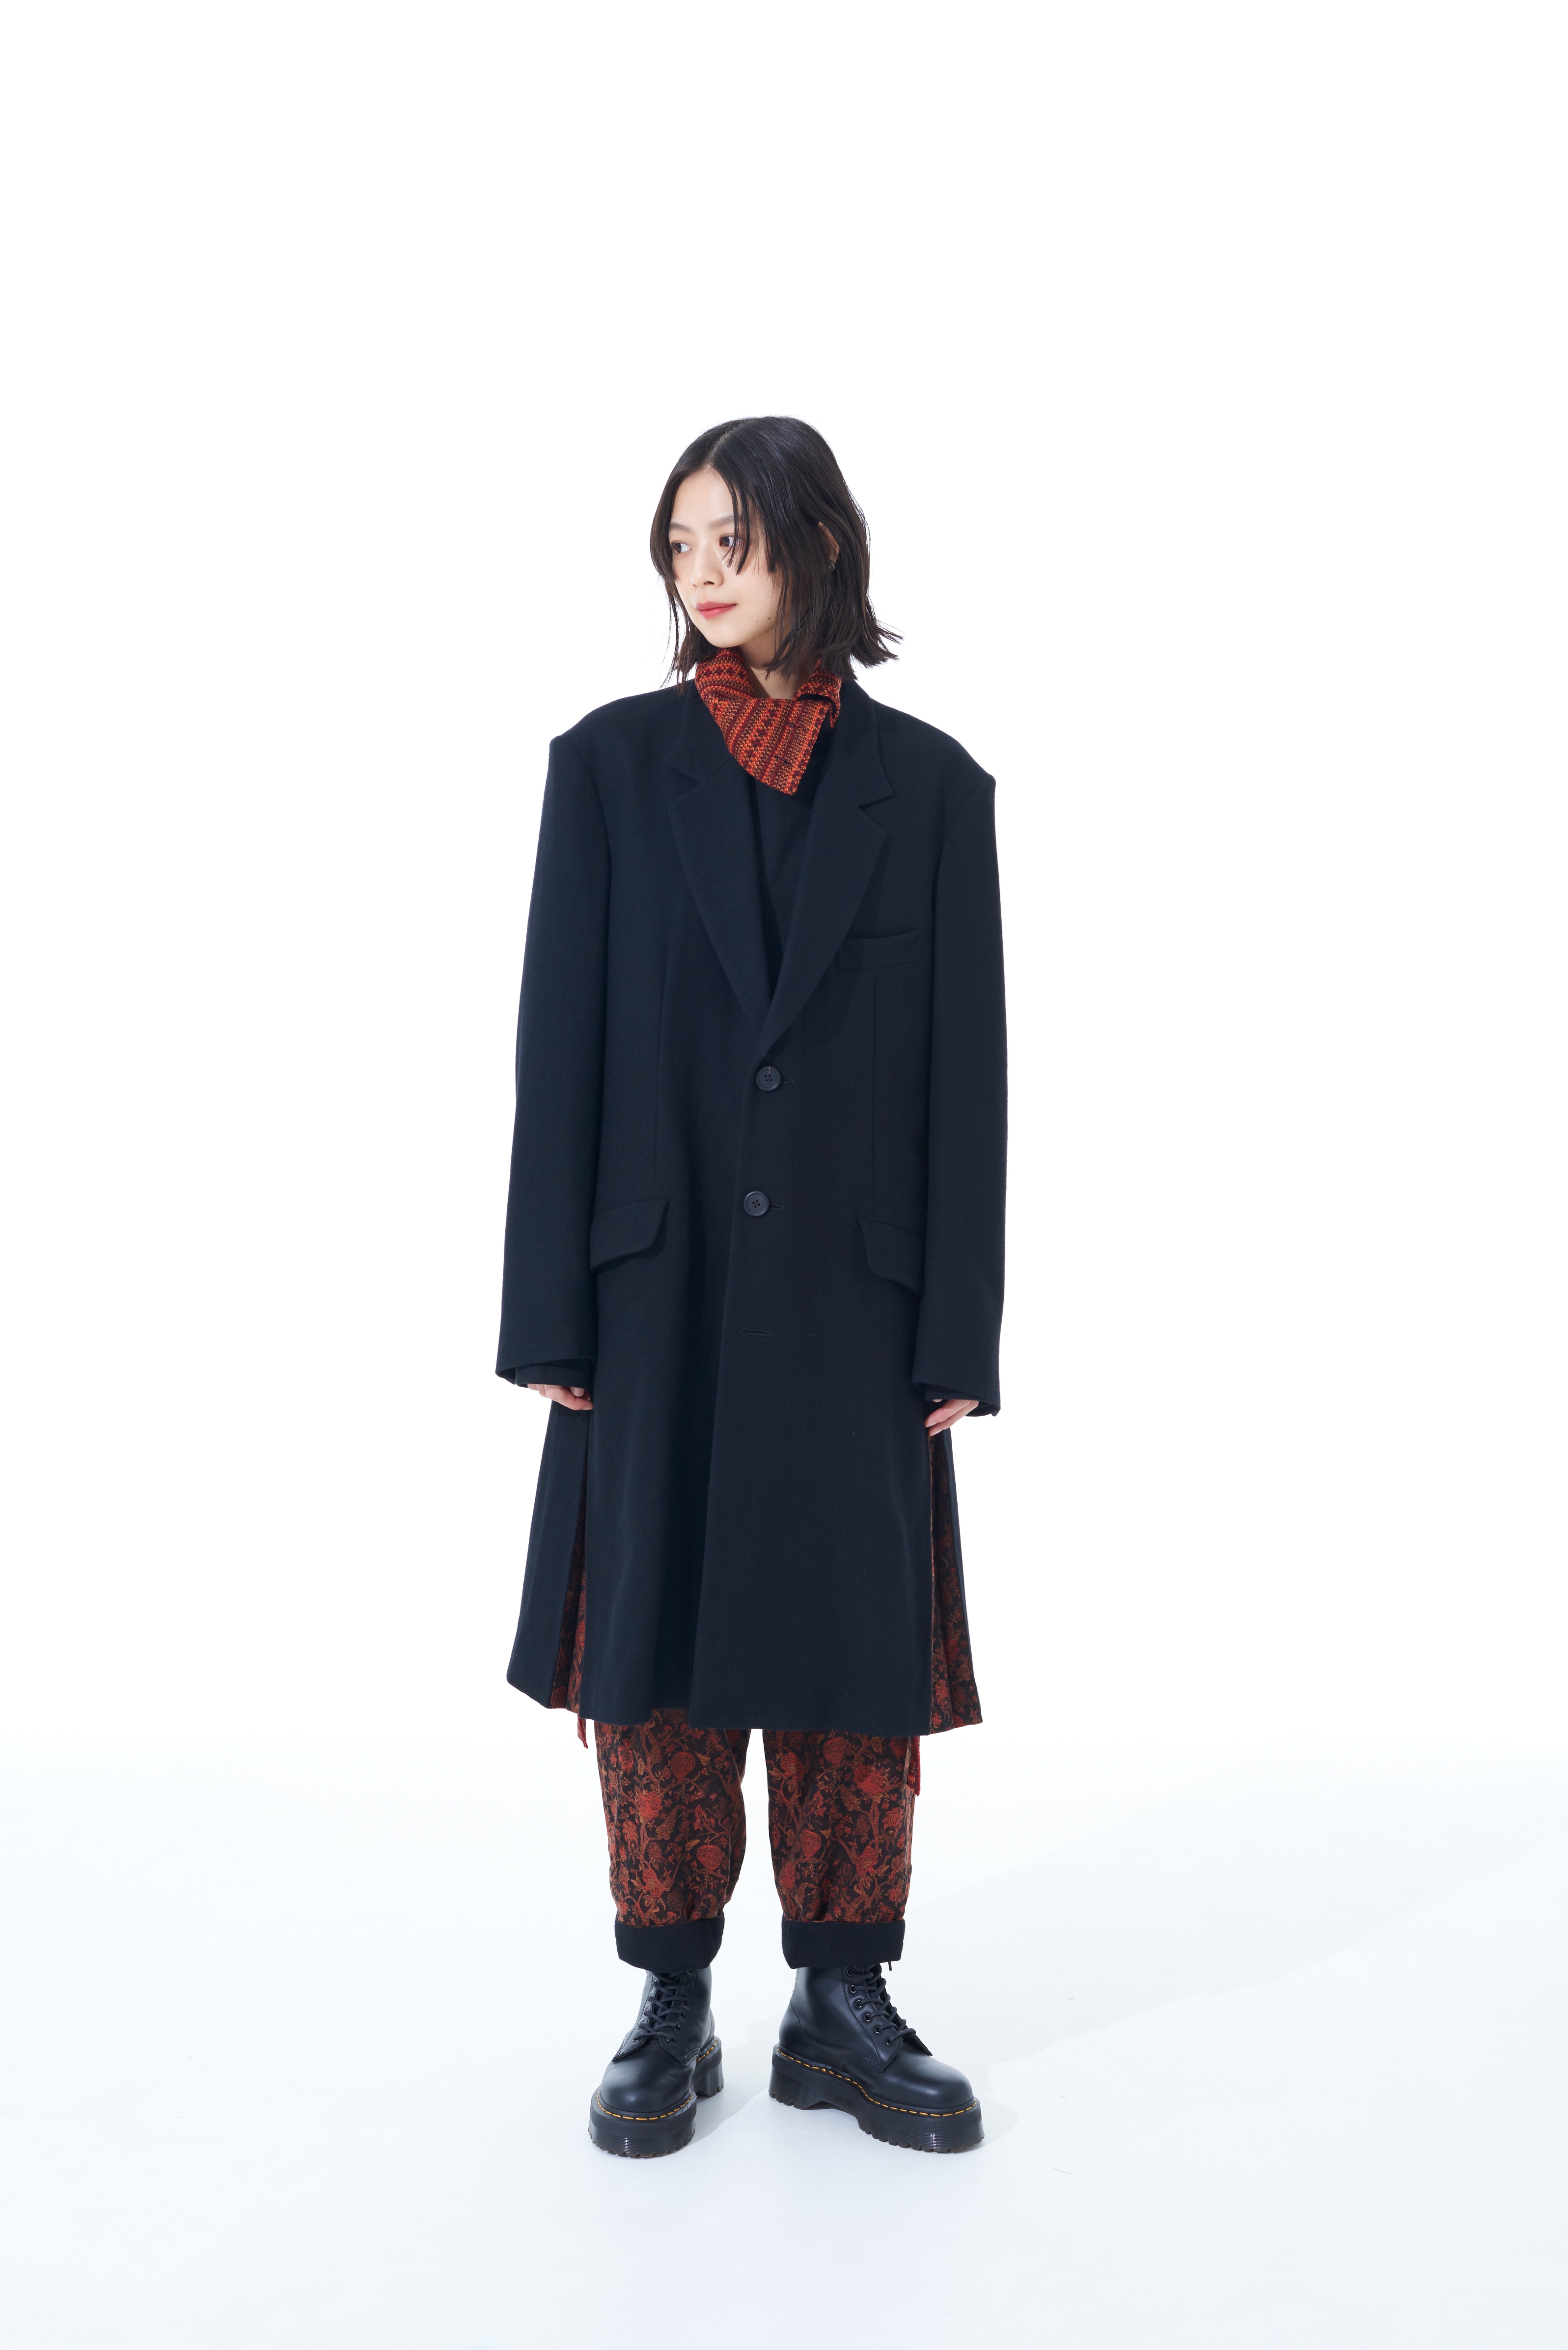 1/10 Flannel + Cotton/Thorny Jacquard Gusseted Hem Long Jacket